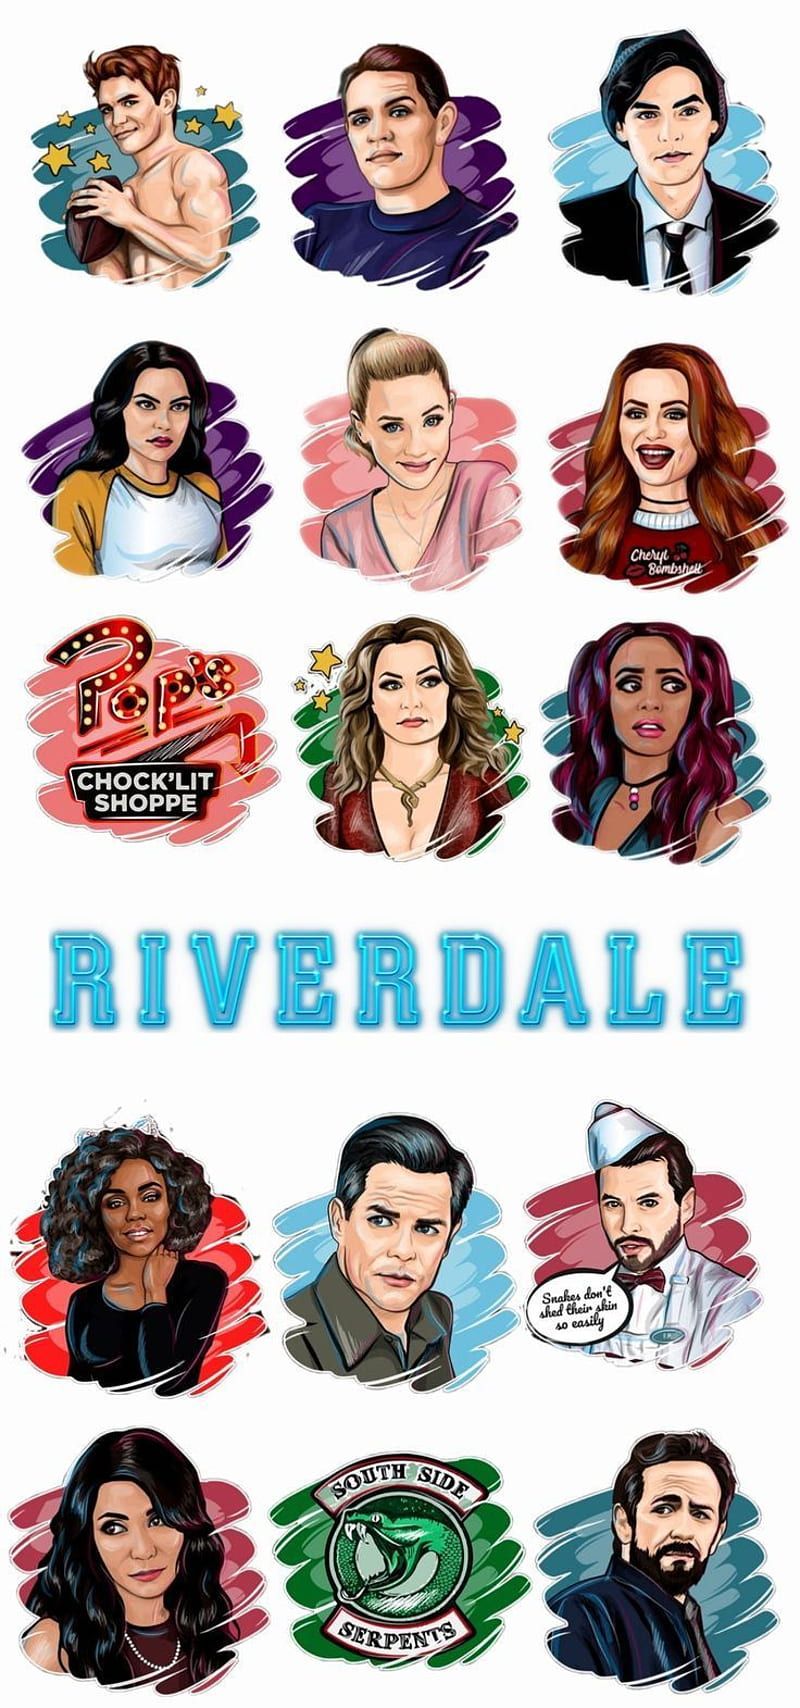 Riverdale is a show that is based on the Archie Comics. It is a mystery drama that is full of suspense and romance. - Riverdale